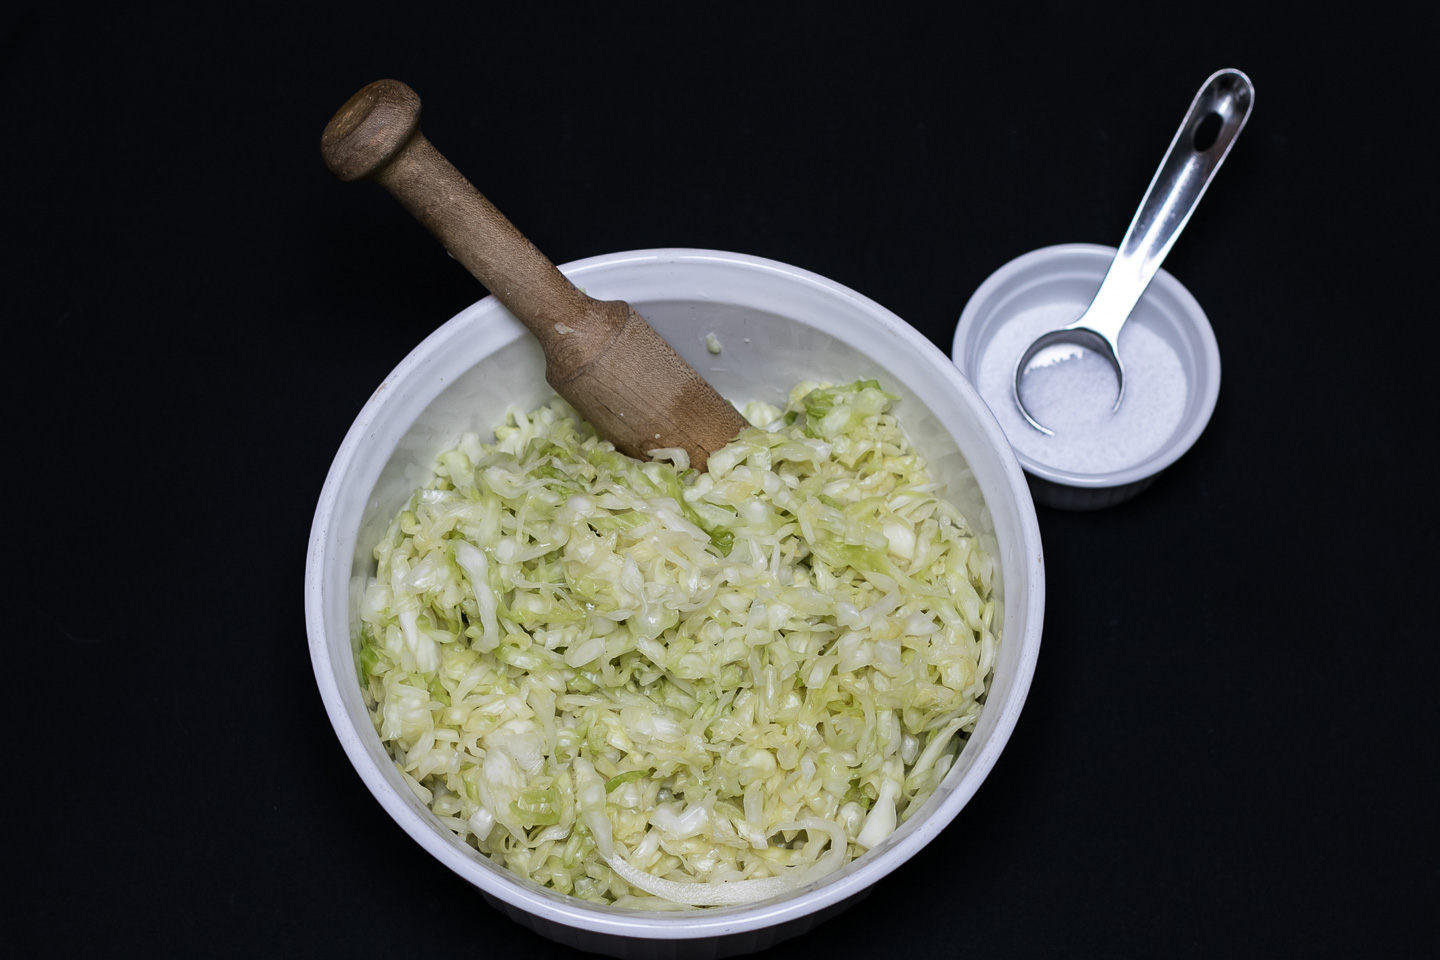 Bowl of shredded cabbage and mallet